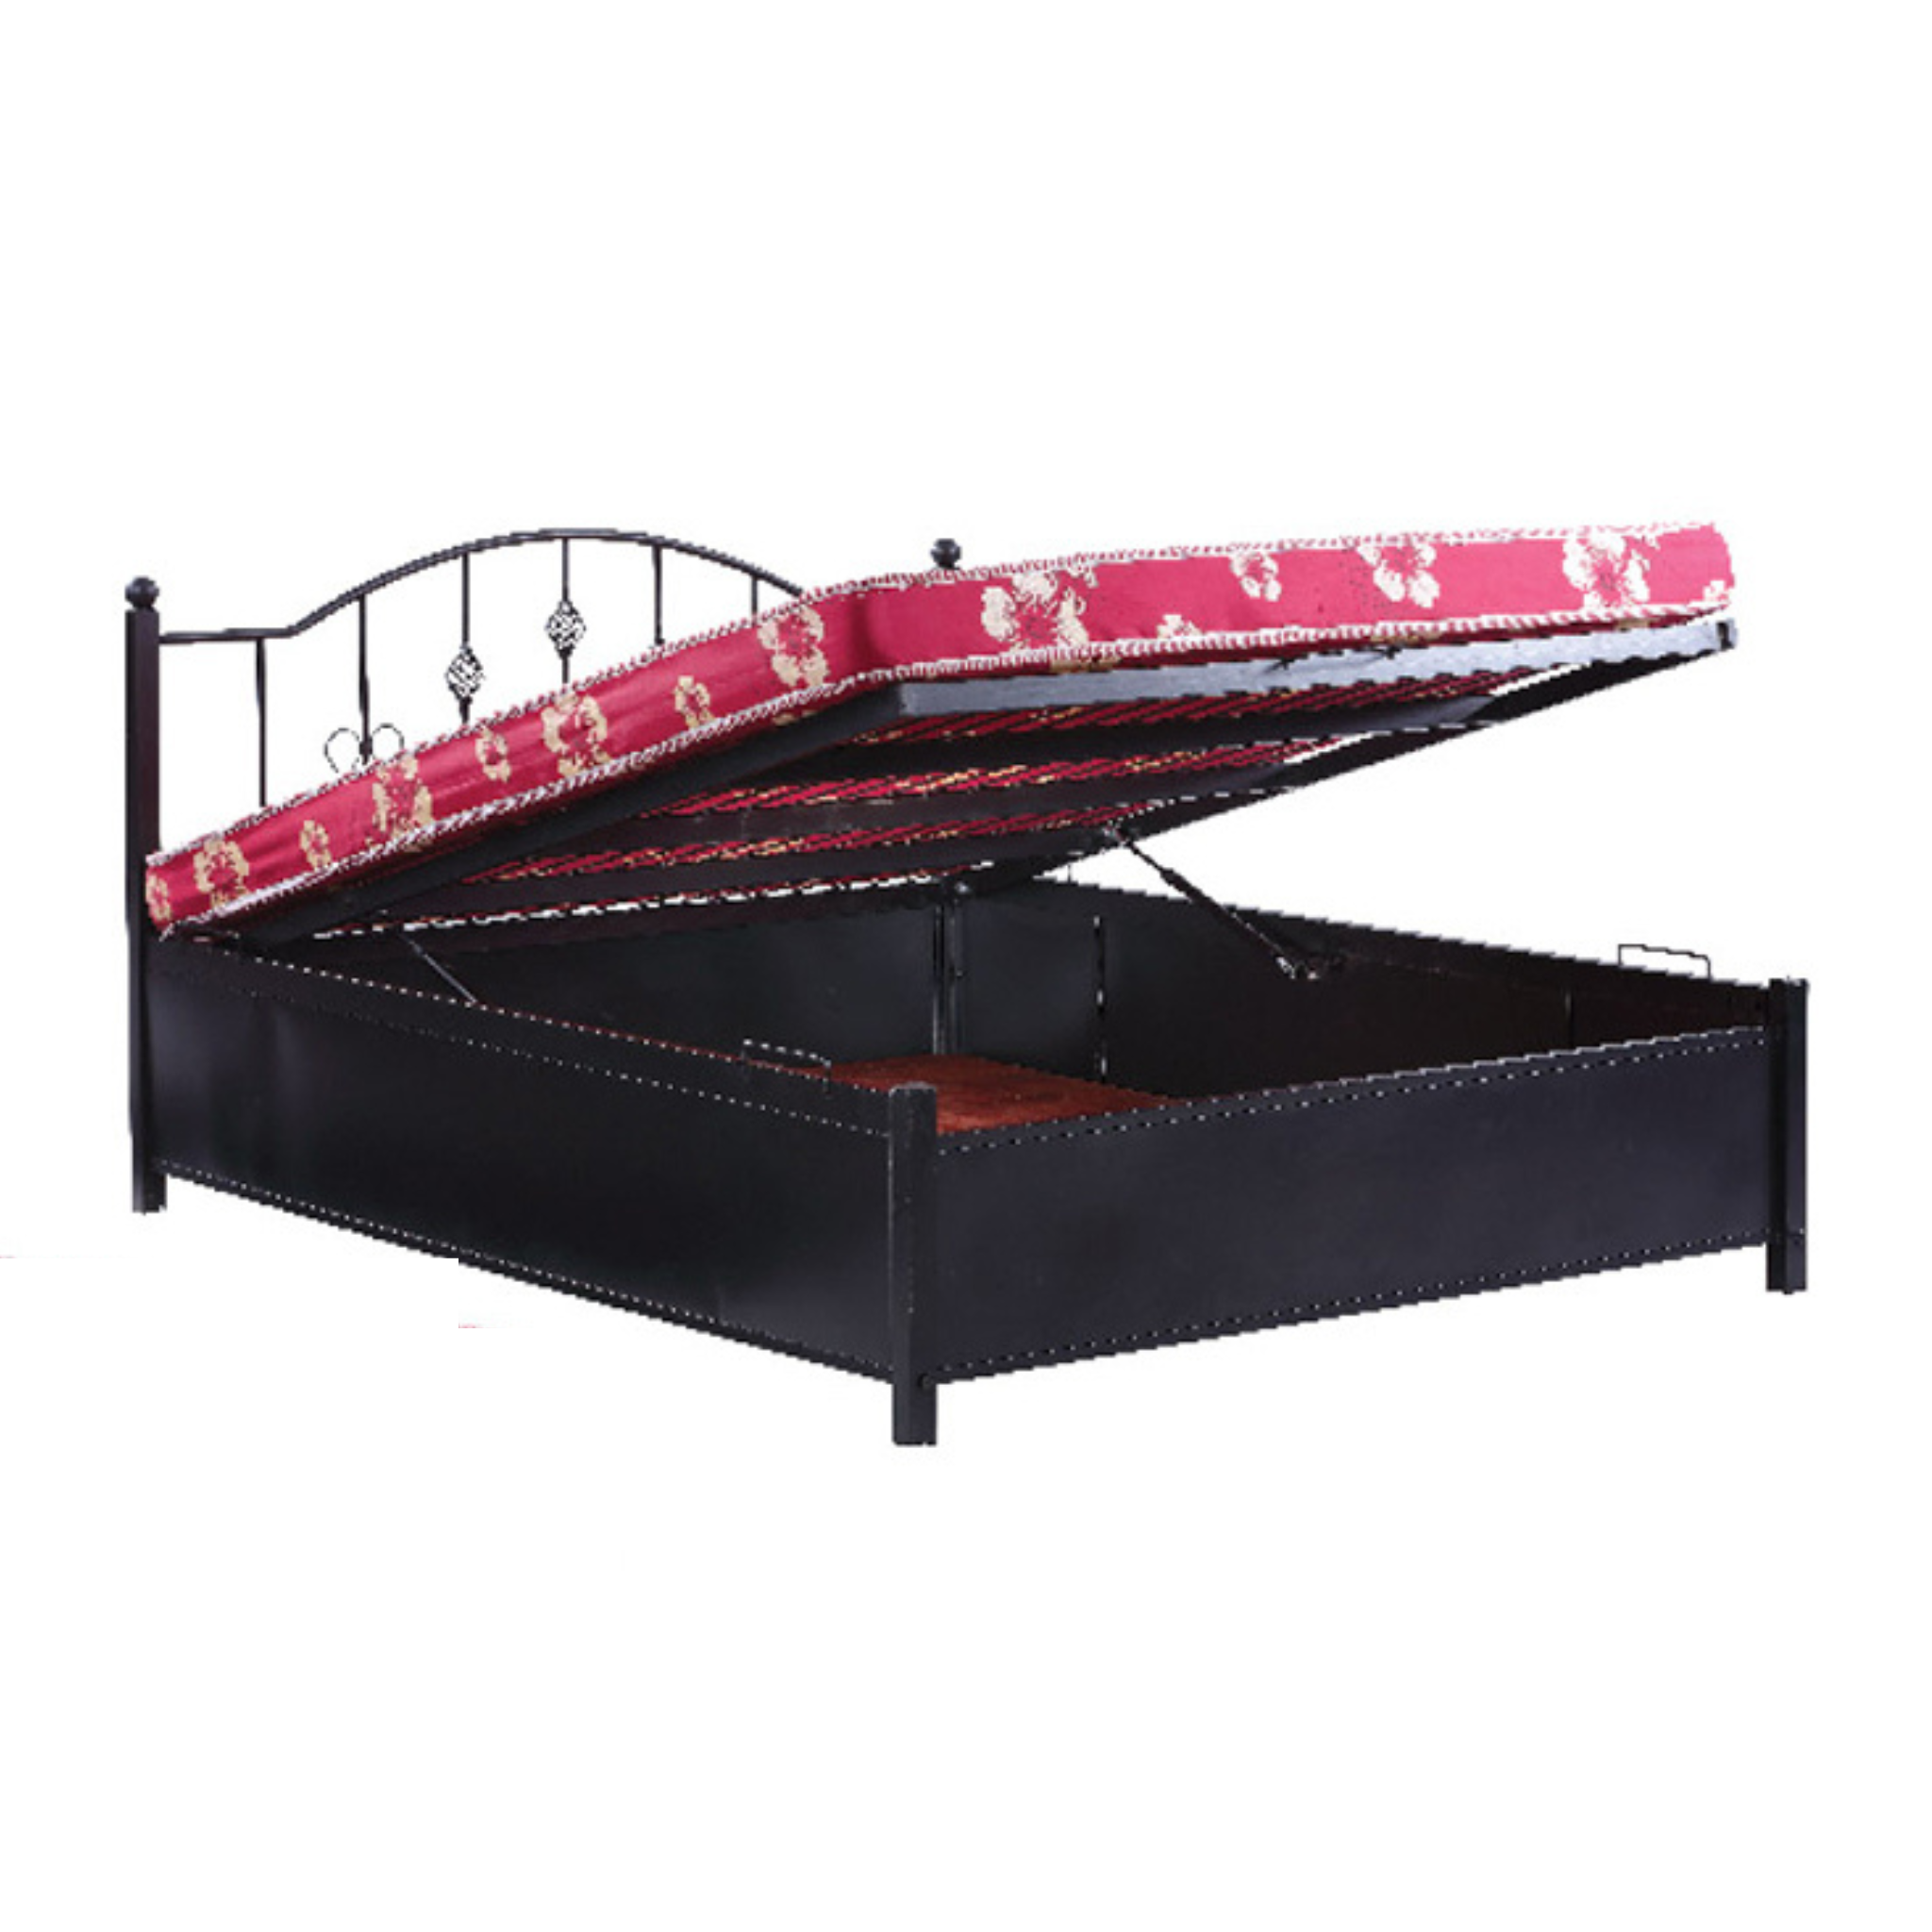 Shuttle Steel Bed with Storage